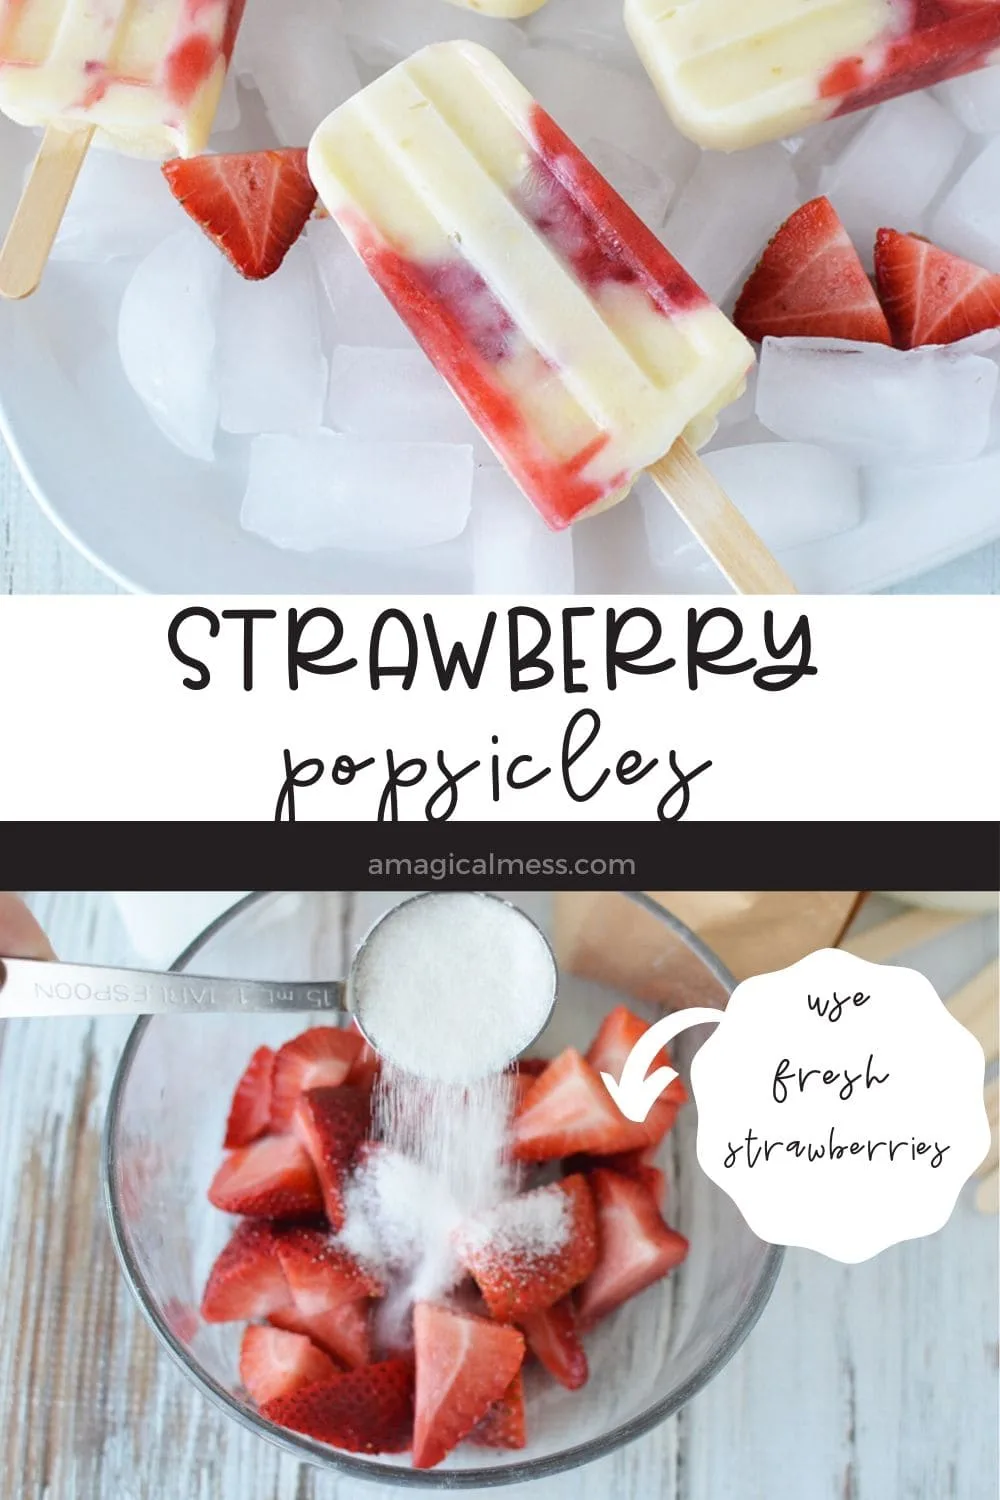 popsicles on ice and strawberries in food processor